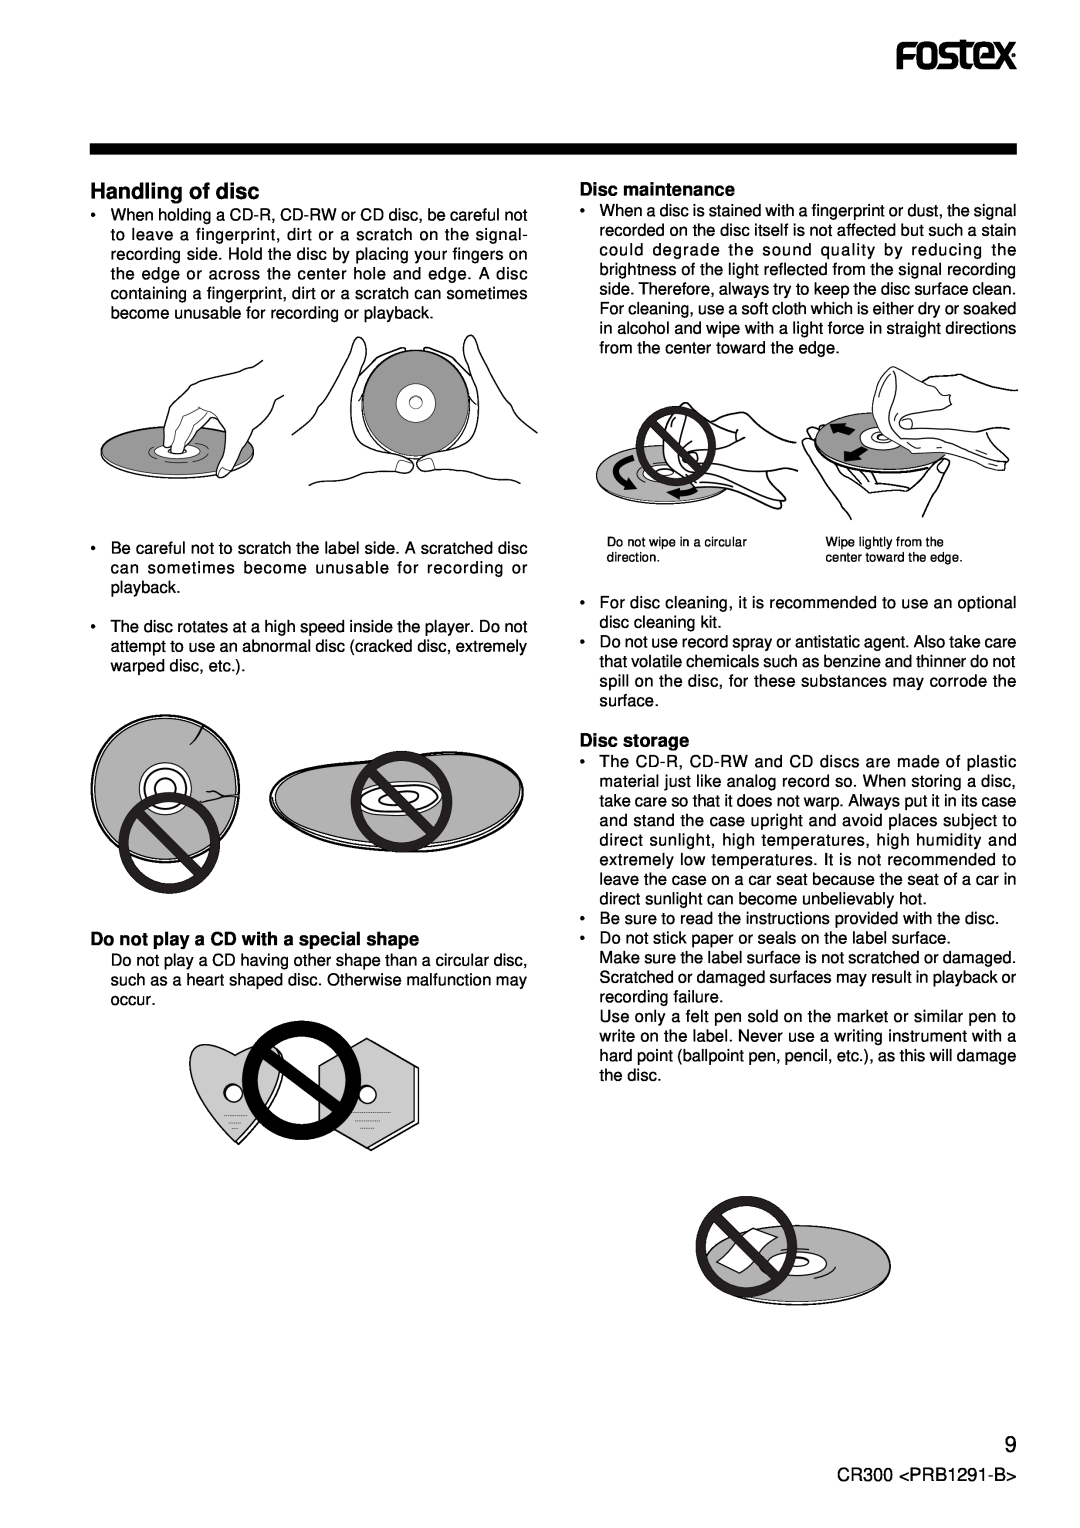 Fostex CR300 owner manual Handling of disc, Do not play a CD with a special shape, Disc maintenance, Disc storage 